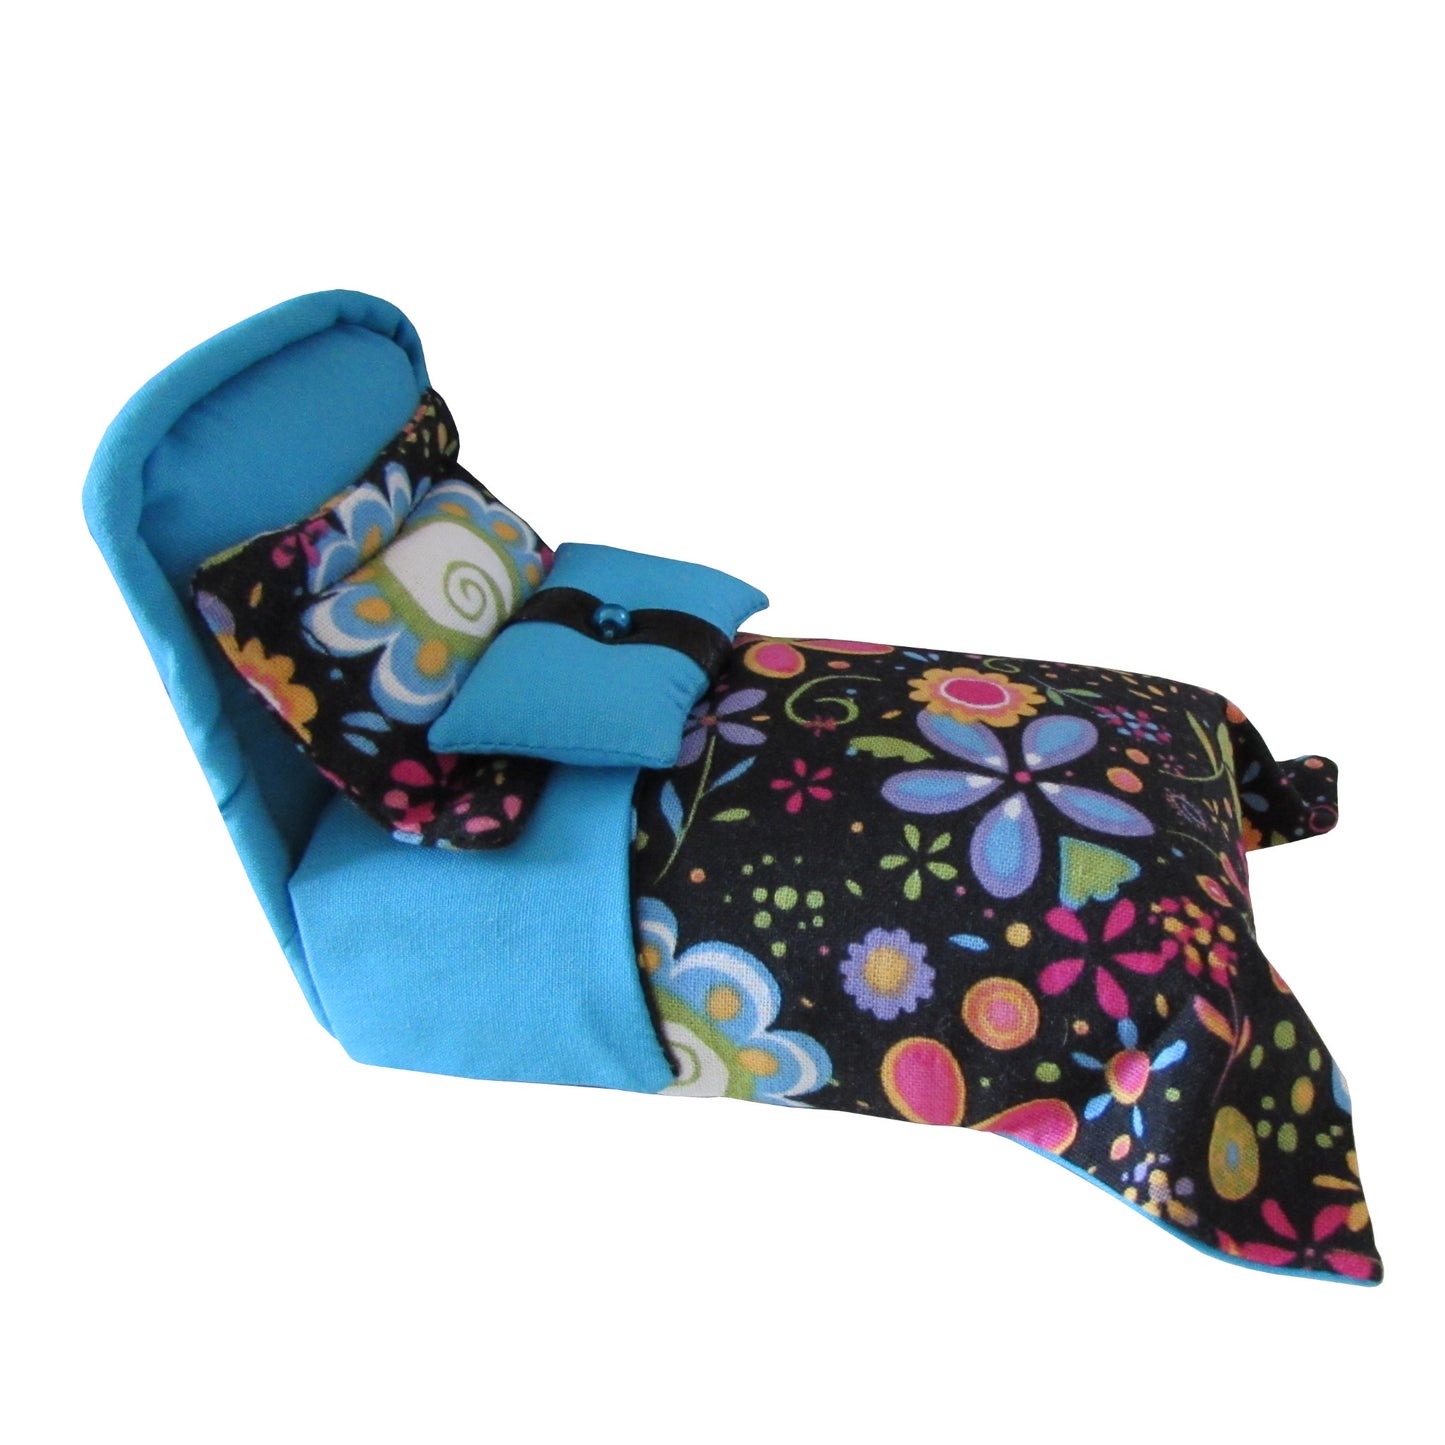 Turquoise Pincushion Bed with Floral Bedding Side view